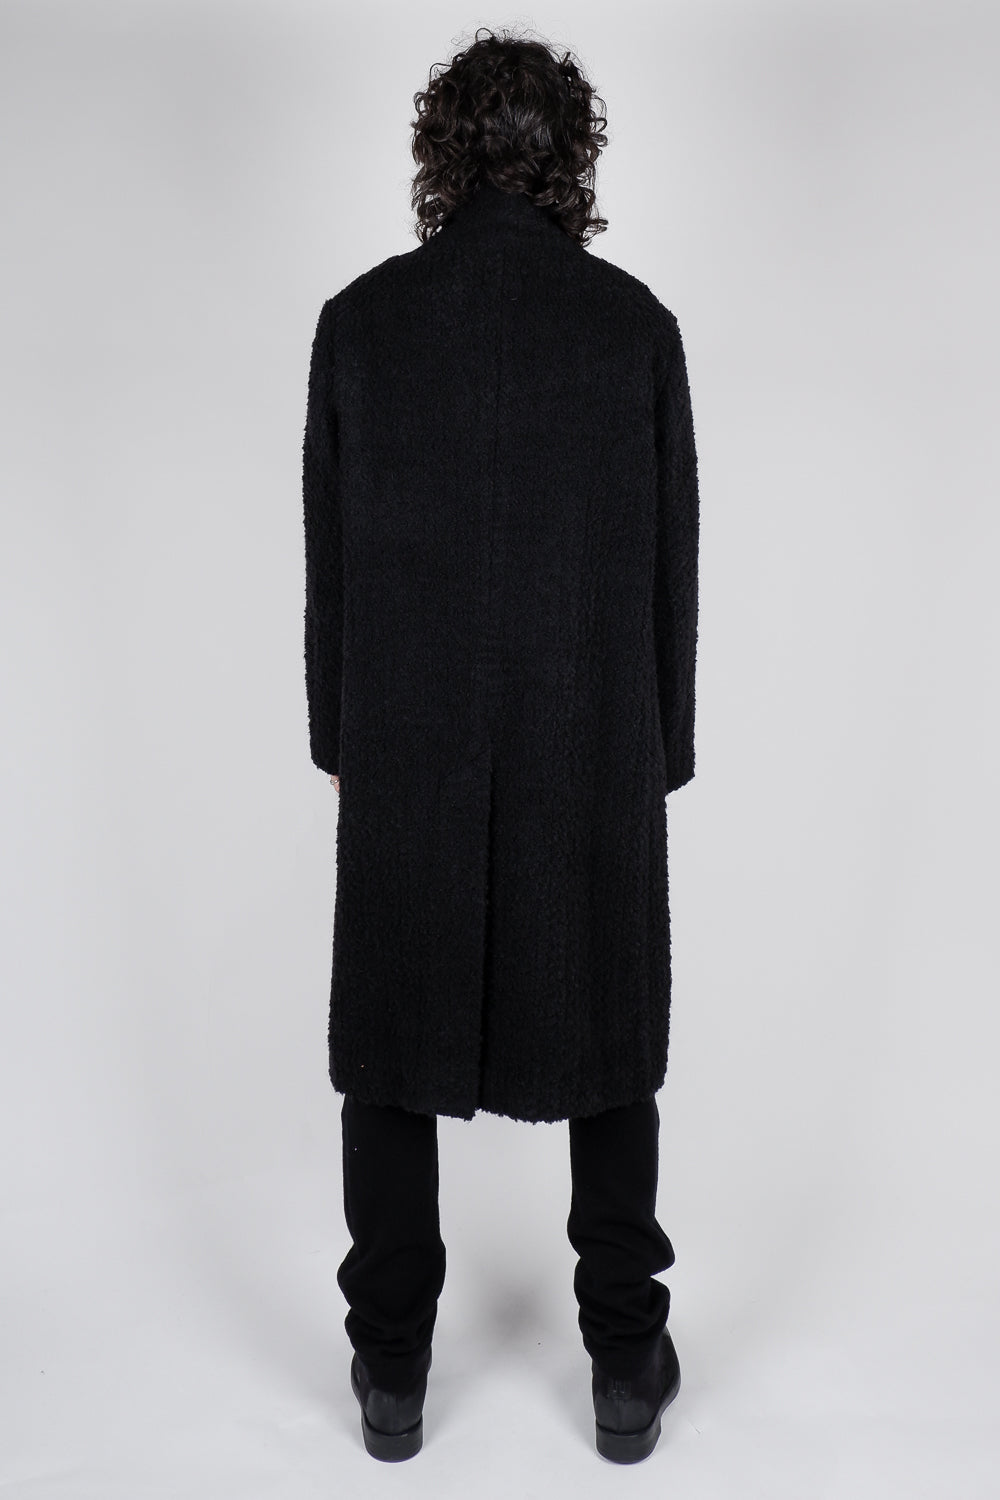 Buy the Hannes Roether Long Boiled Wool Coat in Black at Intro. Spend £50 for free UK delivery. Official stockists. We ship worldwide.